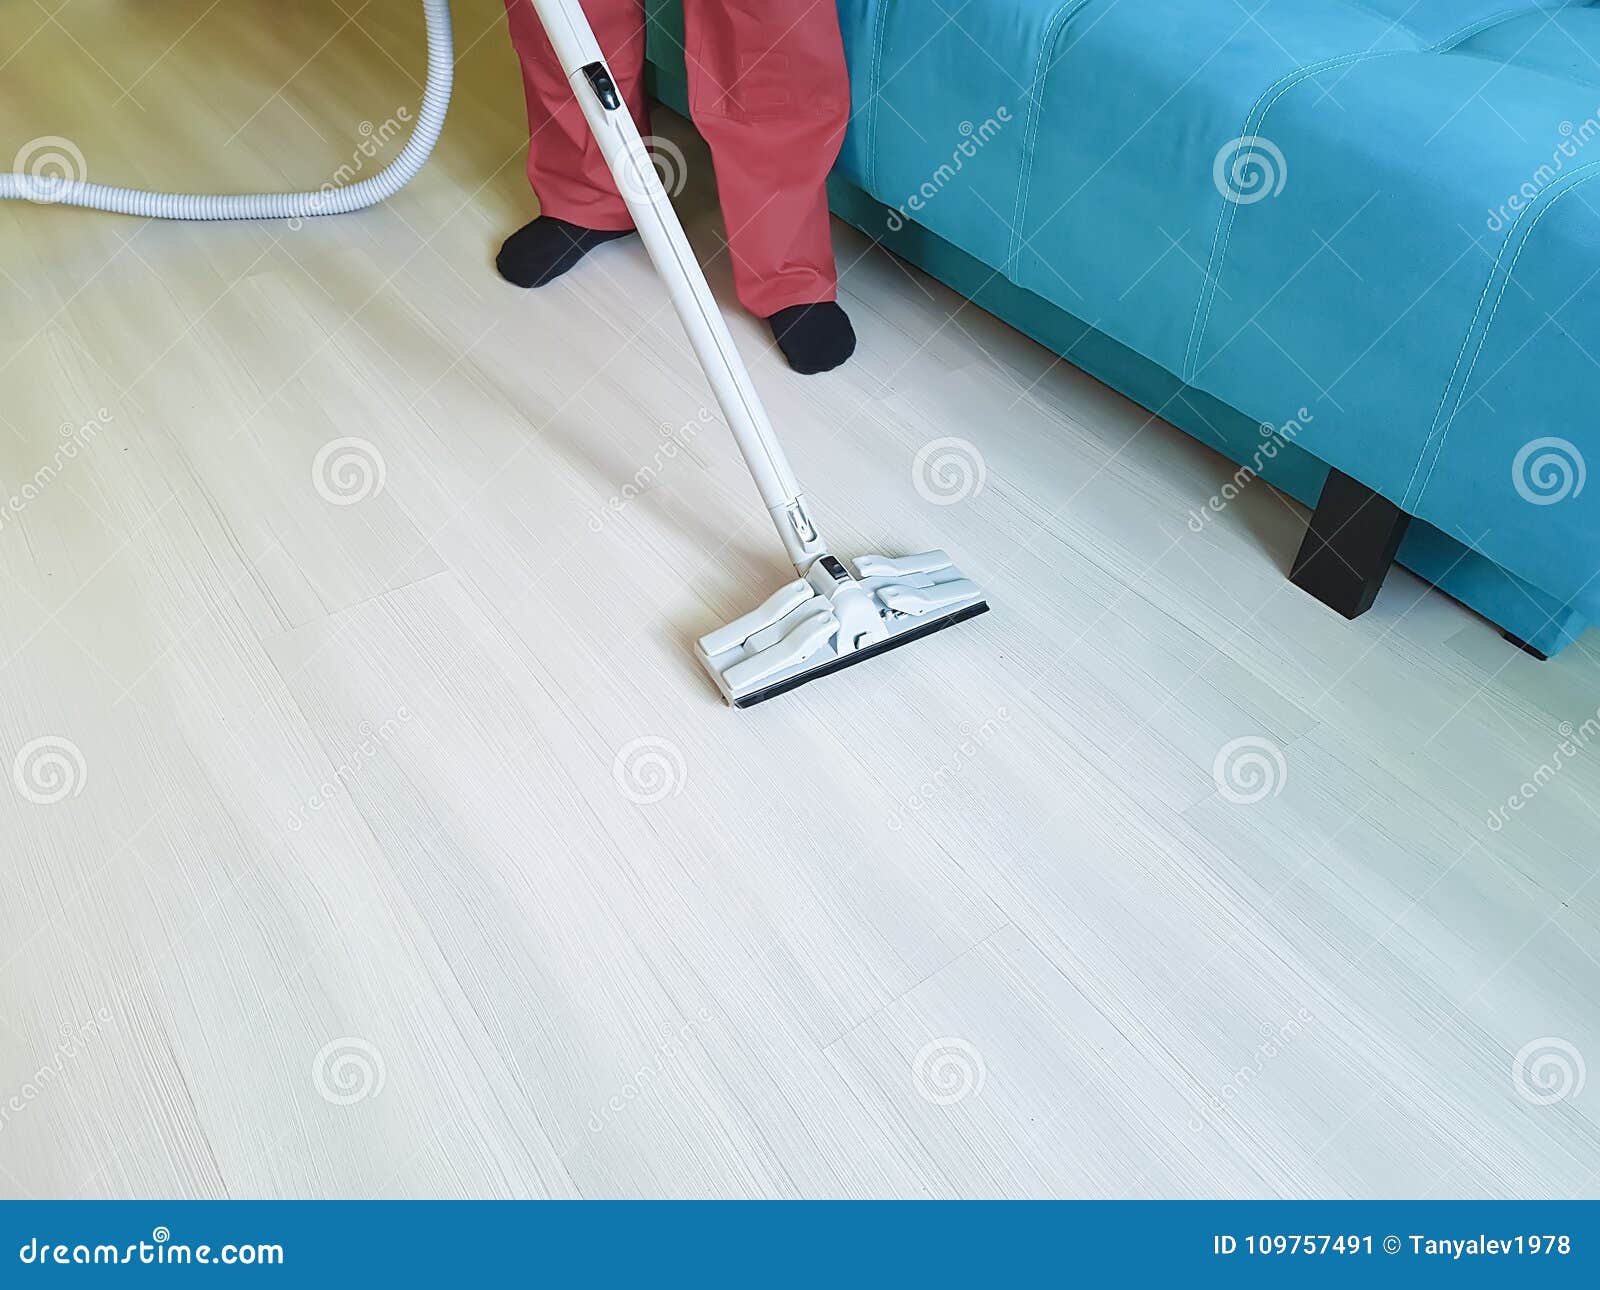 Man Vacuuming The Floor In The Room Equipment Cleaning Service